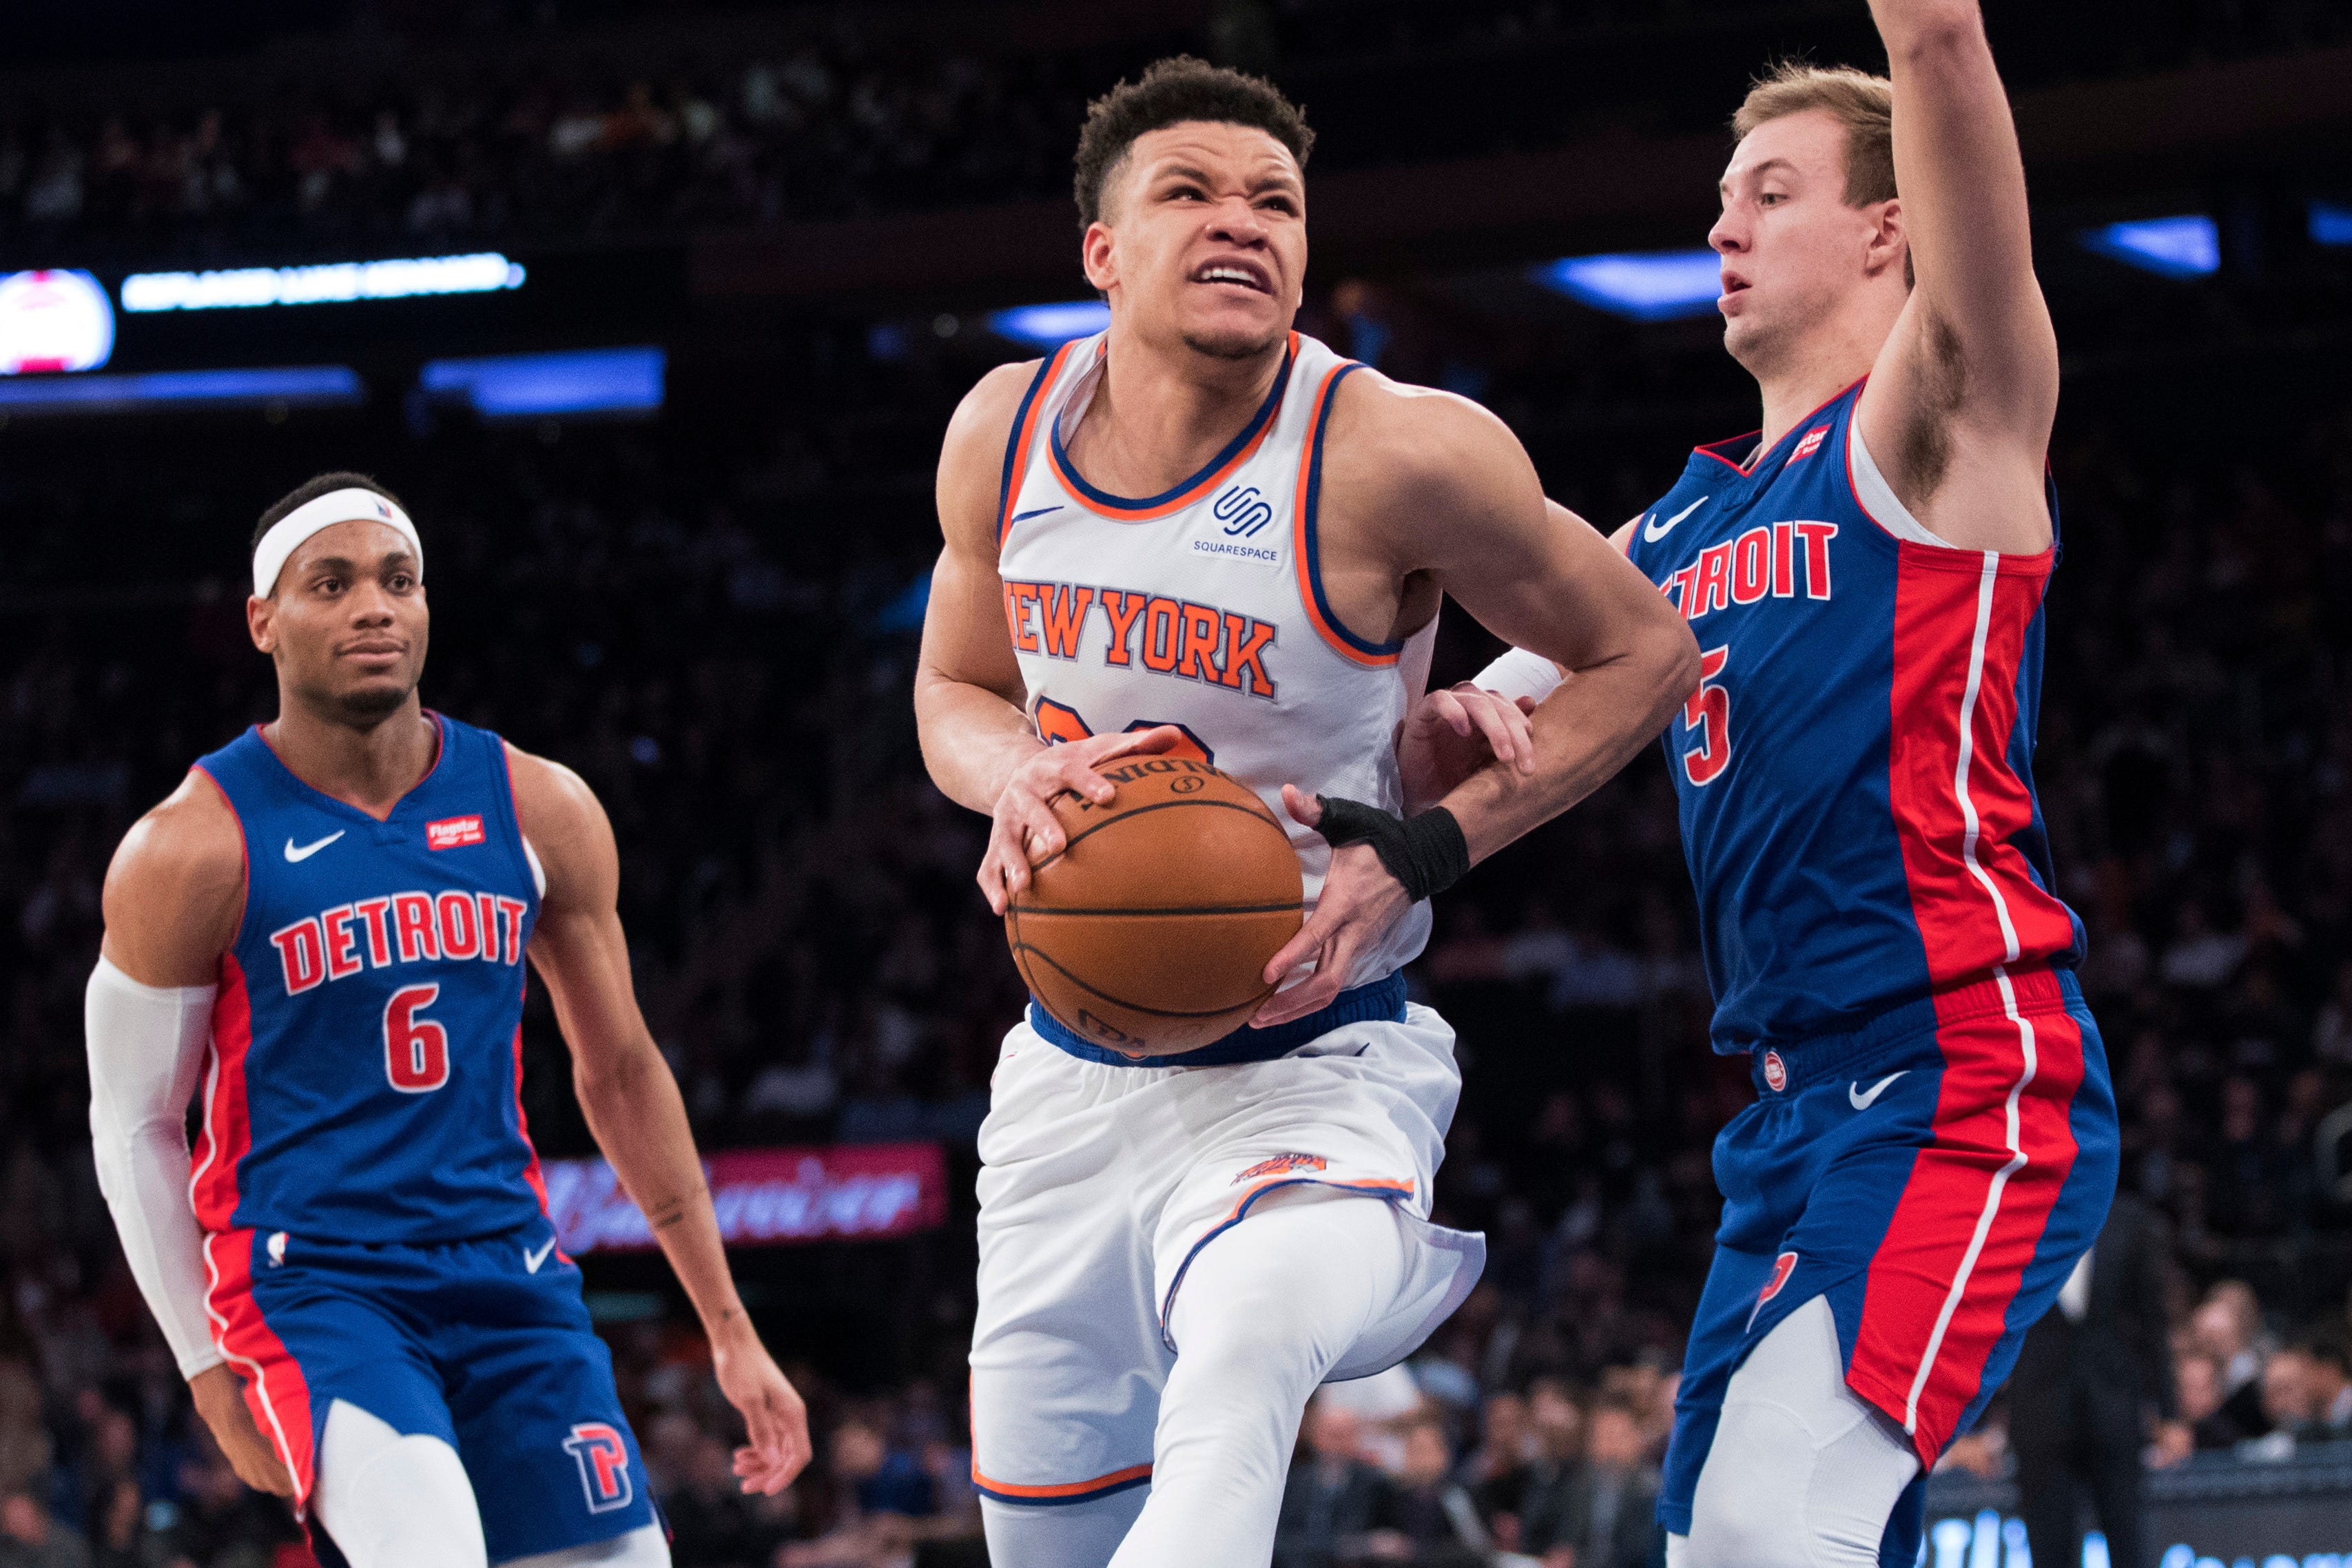 New York Knicks forward Kevin Knox, center, goes to the basket against Detroit Pistons guard Luke Kennard (5) during the second half.